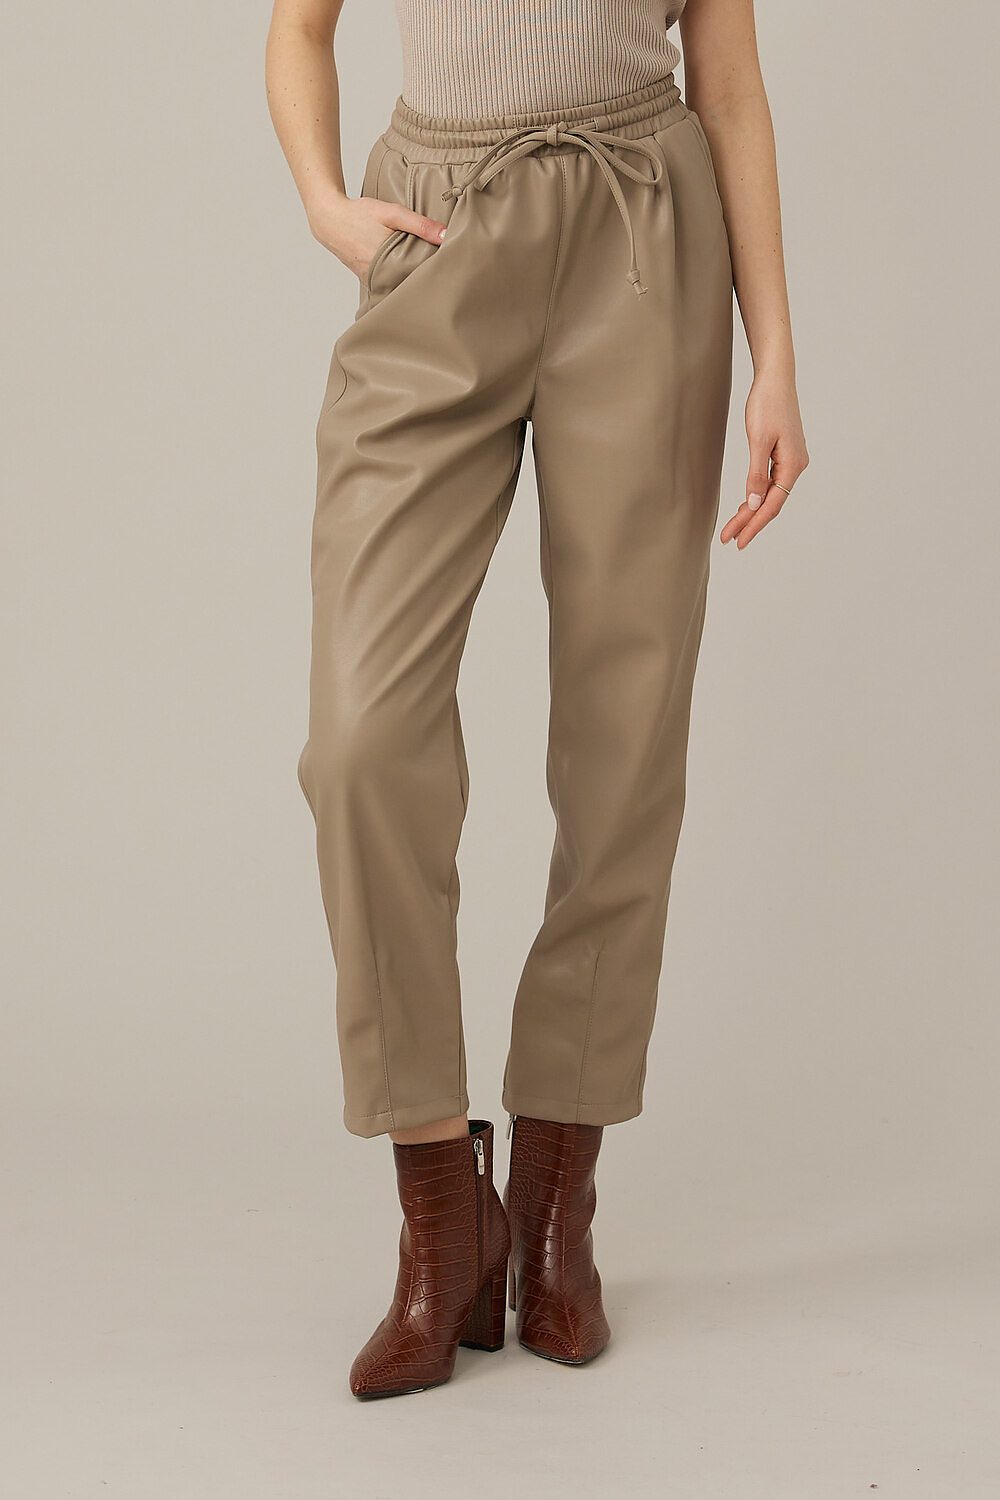 Emproved Vegan Leather Elastic Waist Pants Style A2260. Taupe